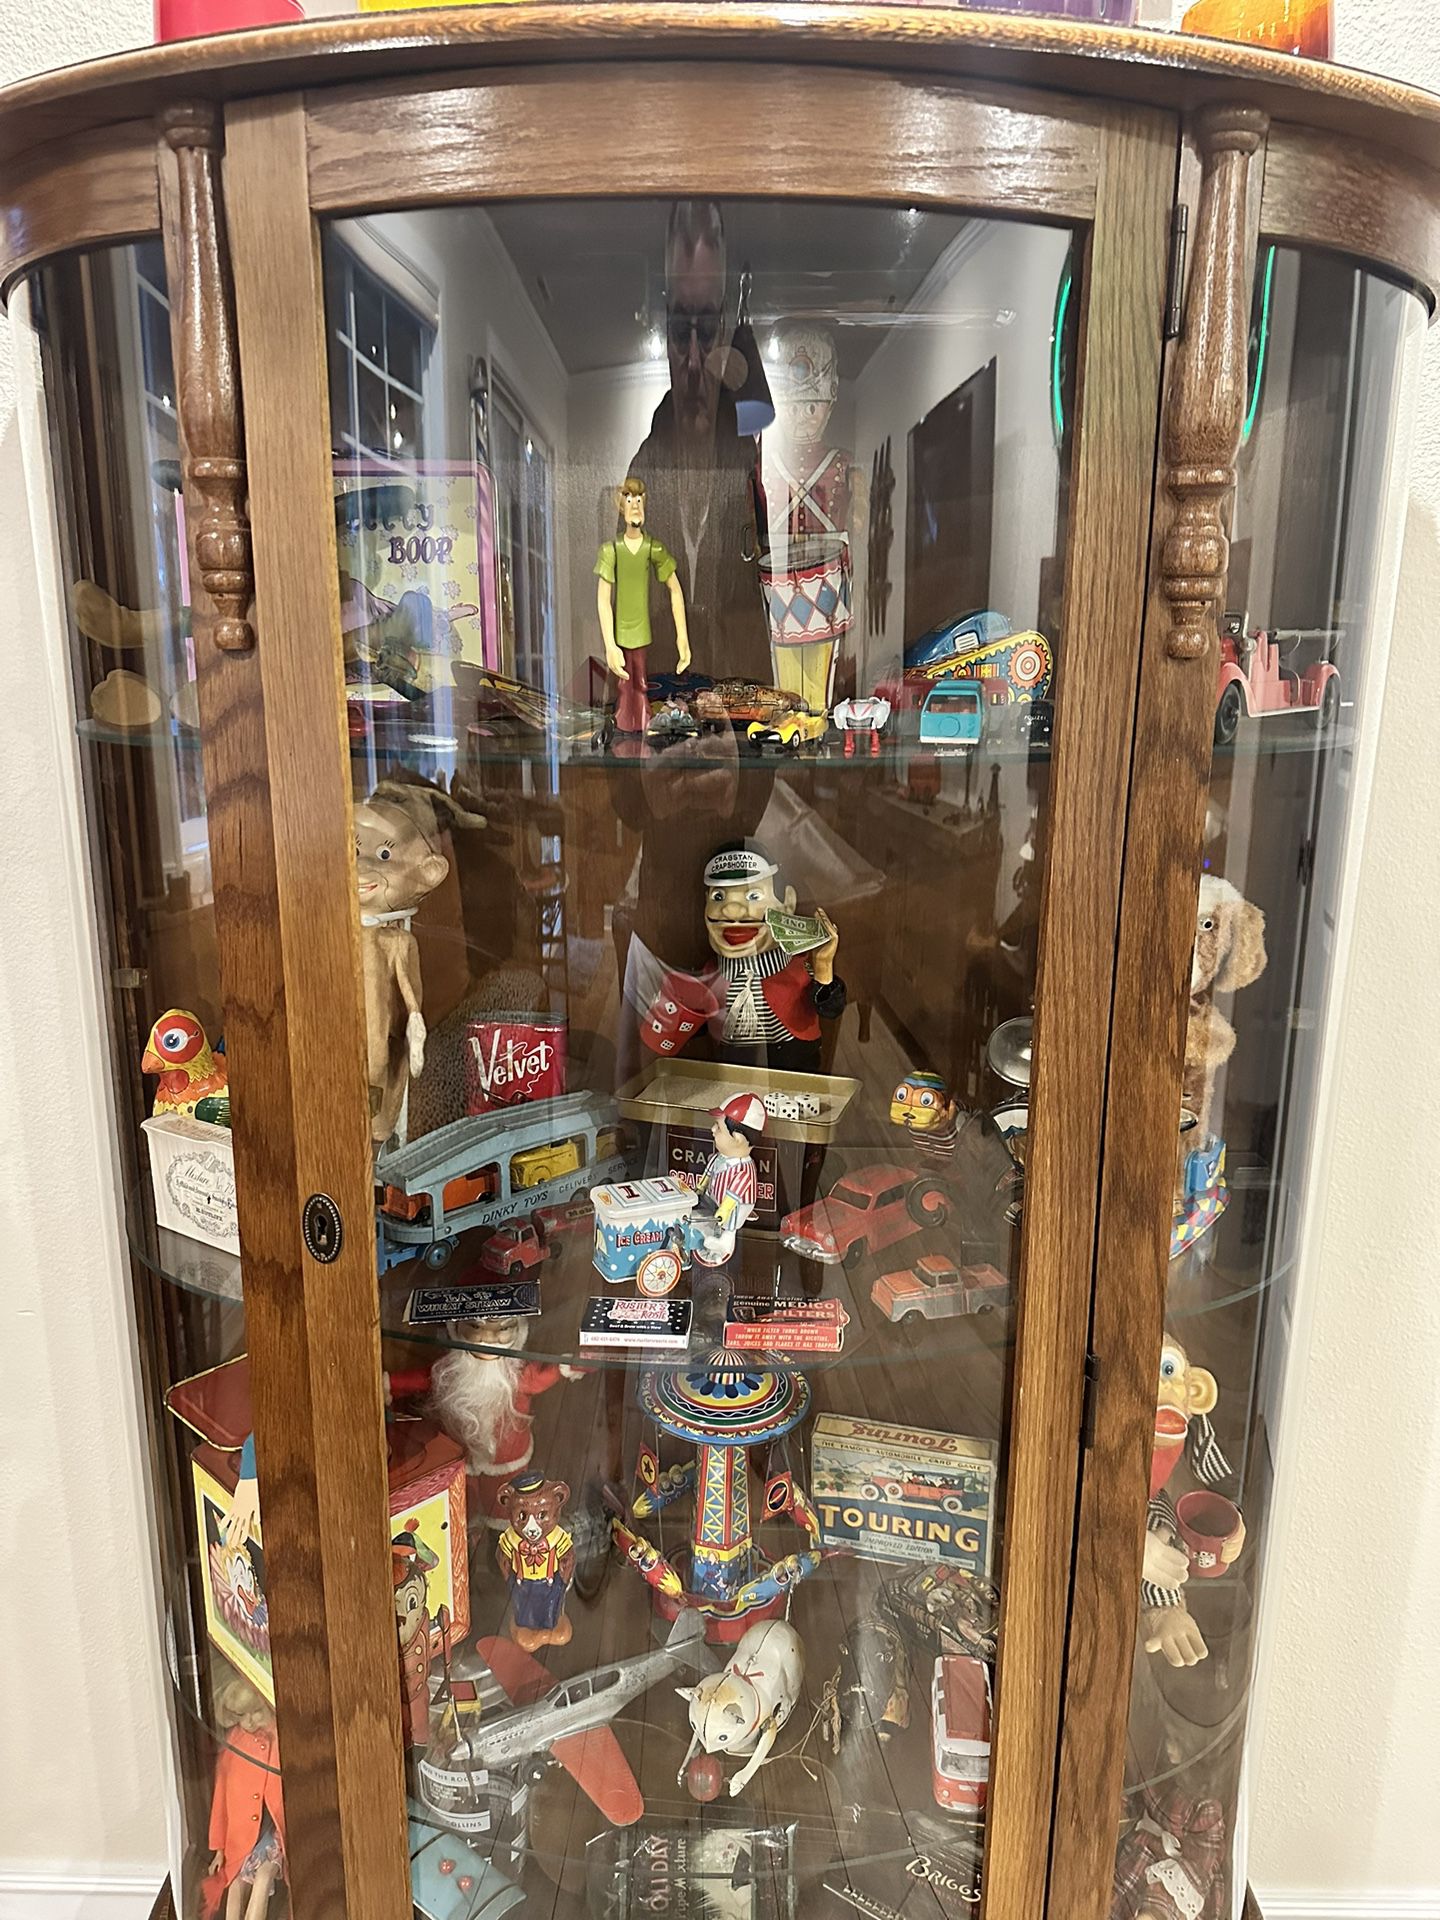 Antique Cabinet And Toys For Sale!